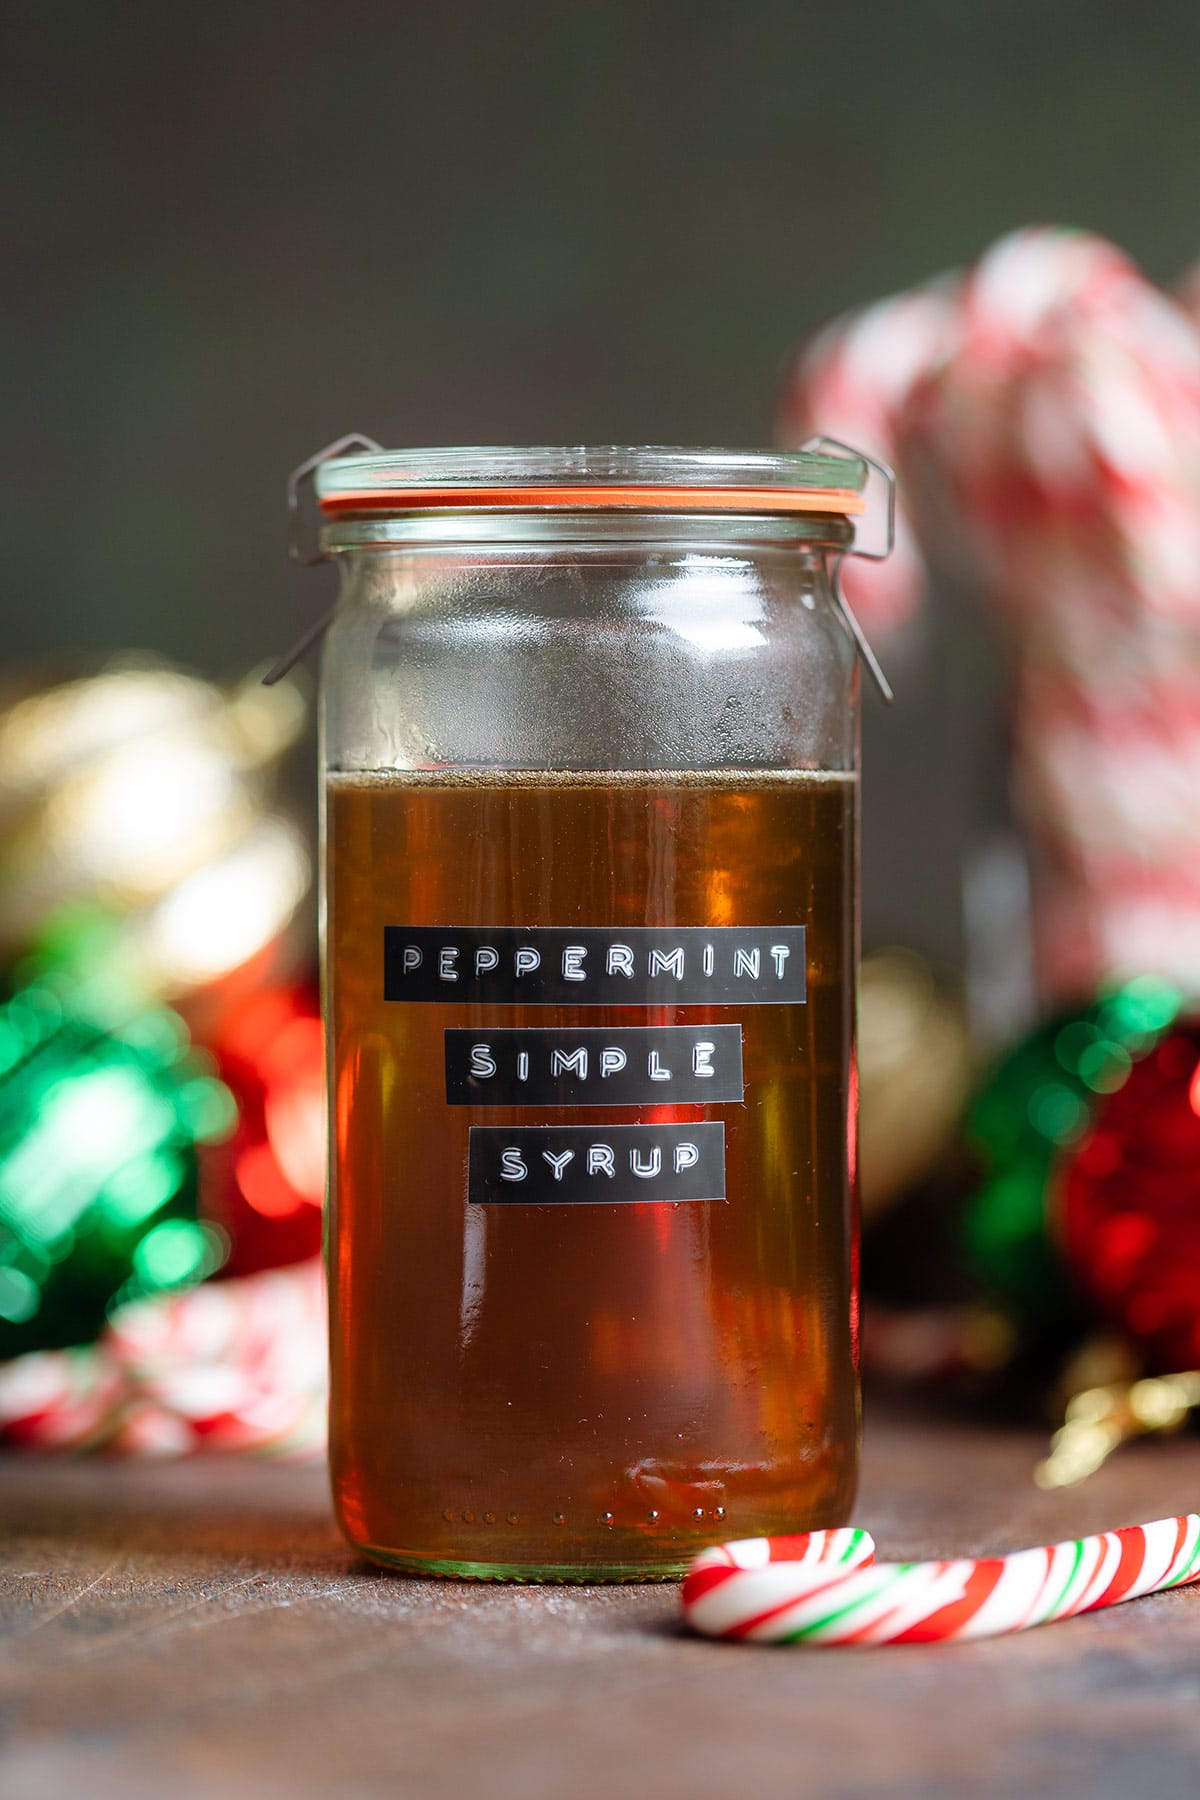 Golden syrup in a glass jar with a glass lid and a black label that says peppermint syrup on the side with Christmas ornaments and candy canes in the background.